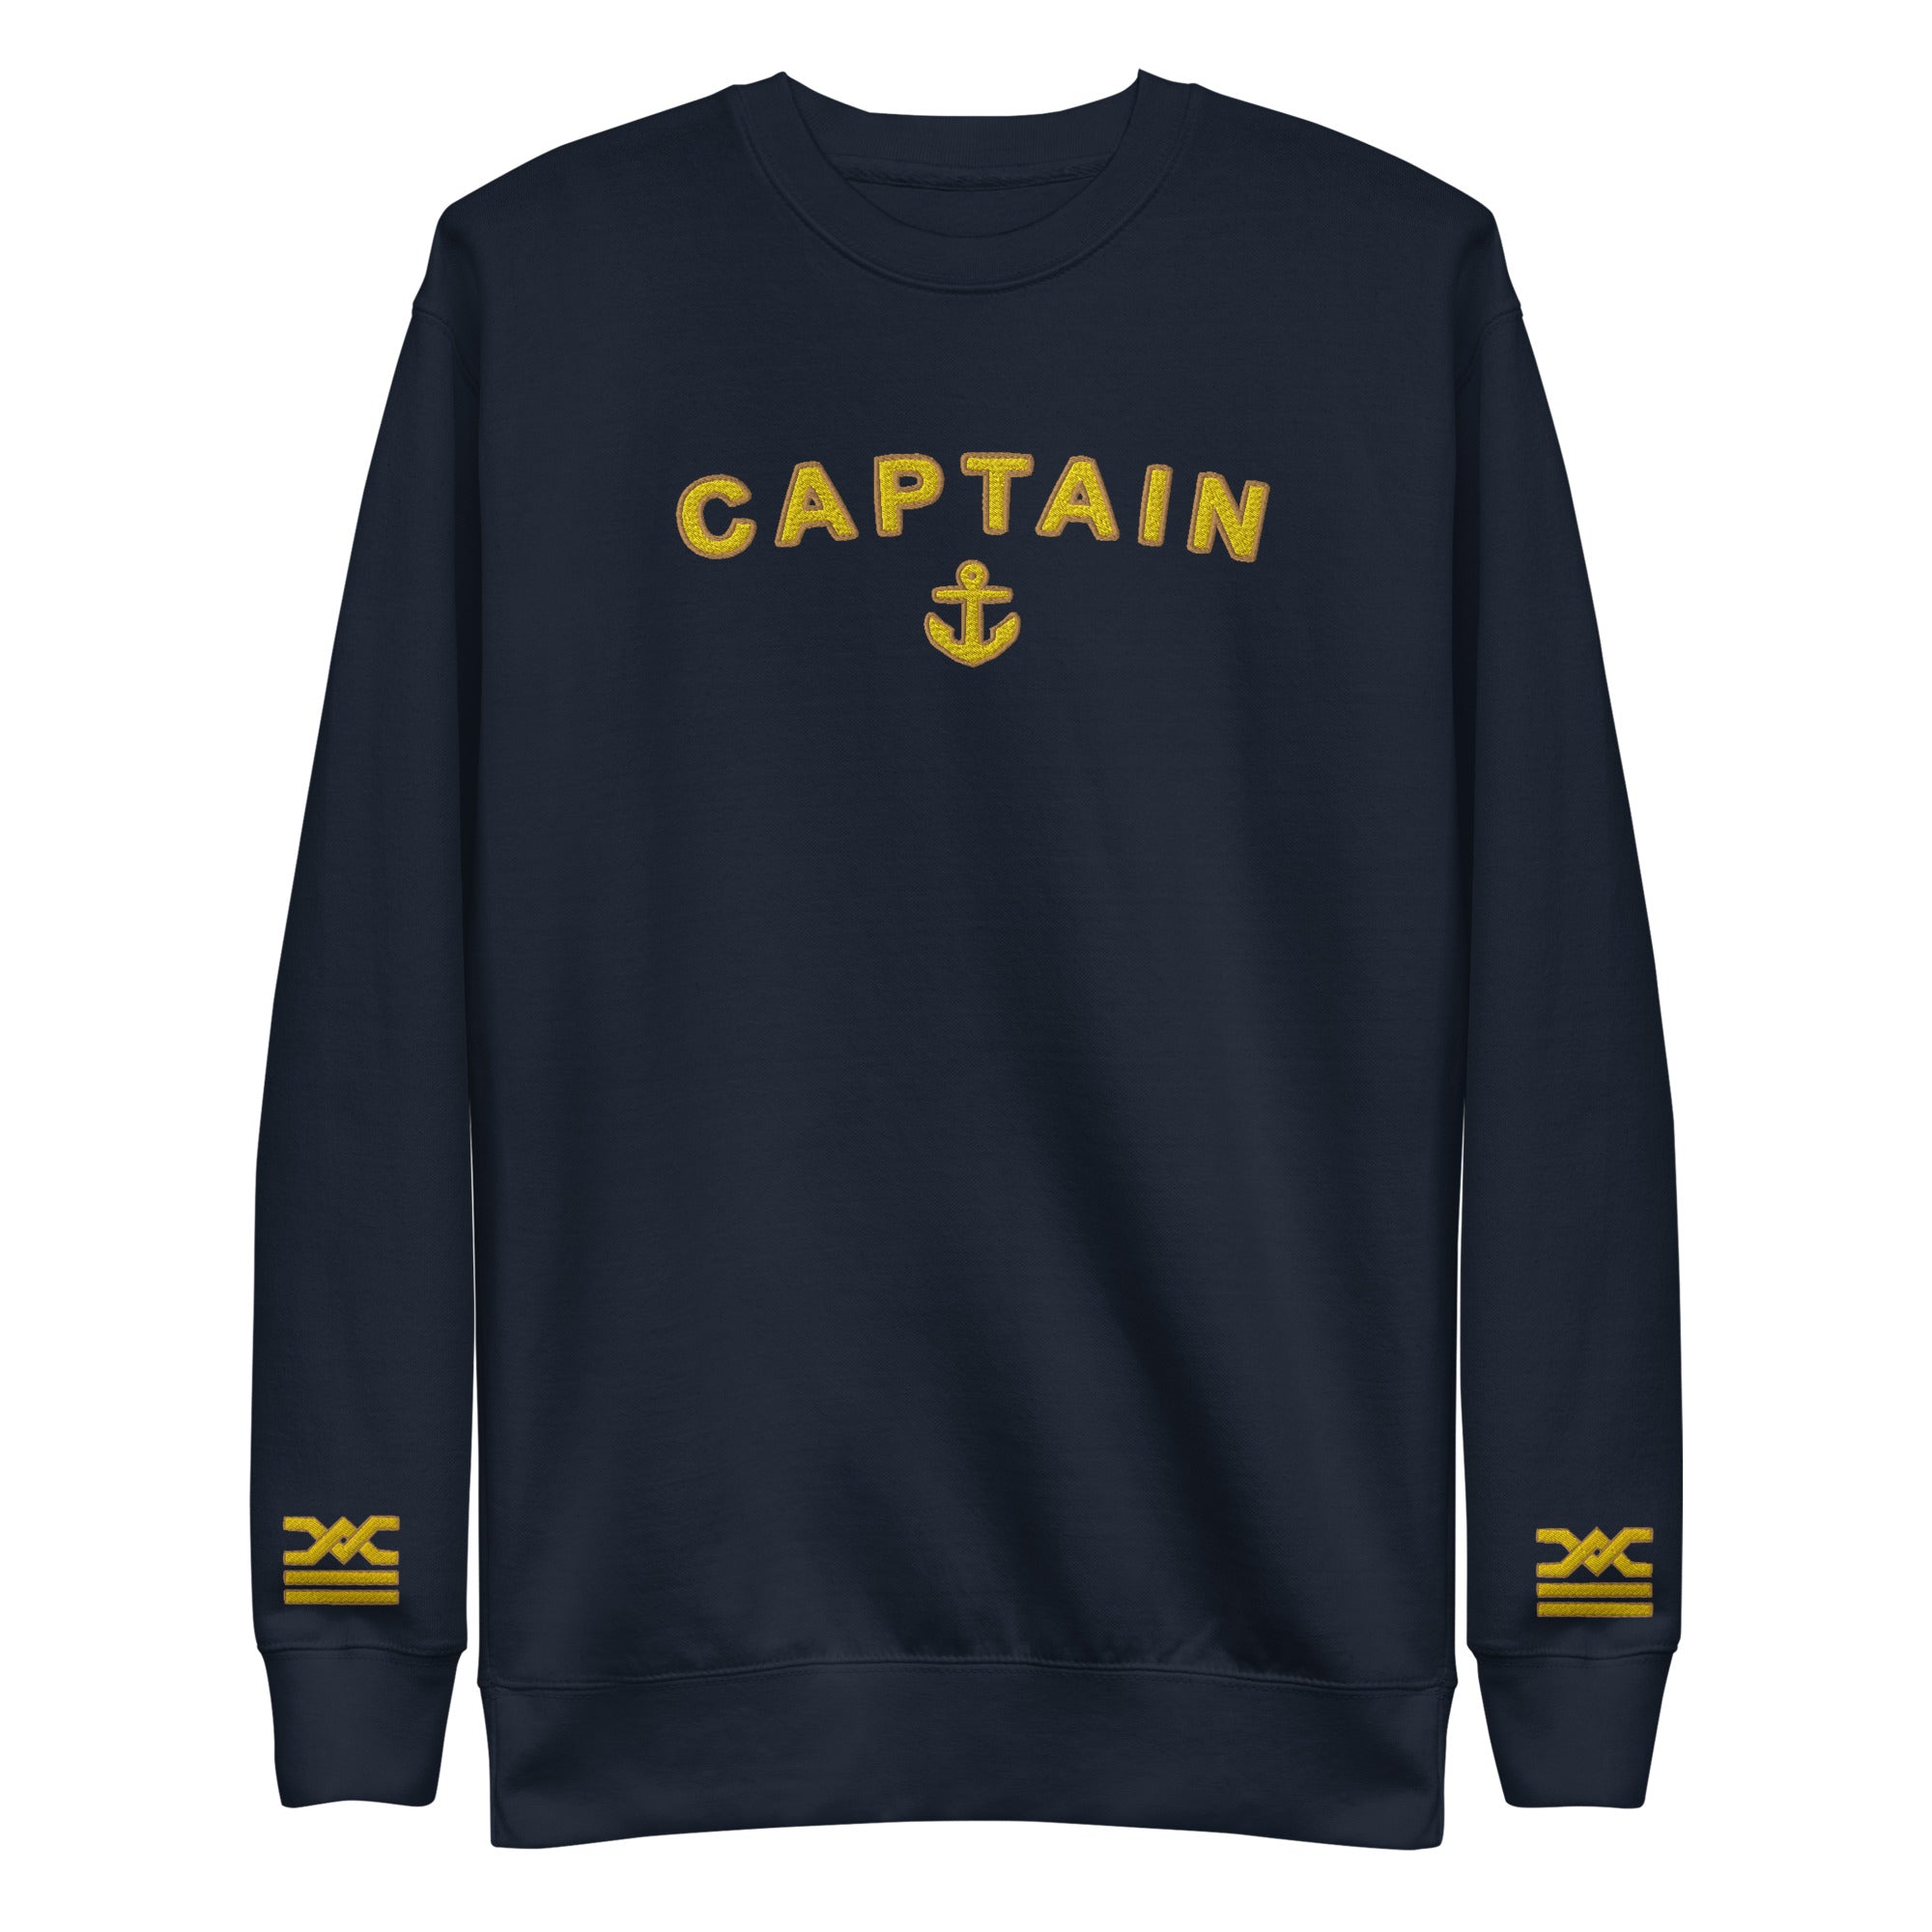 Captain's Choice Sweatshirt: Style and Command at Sea (choose epaulettes)